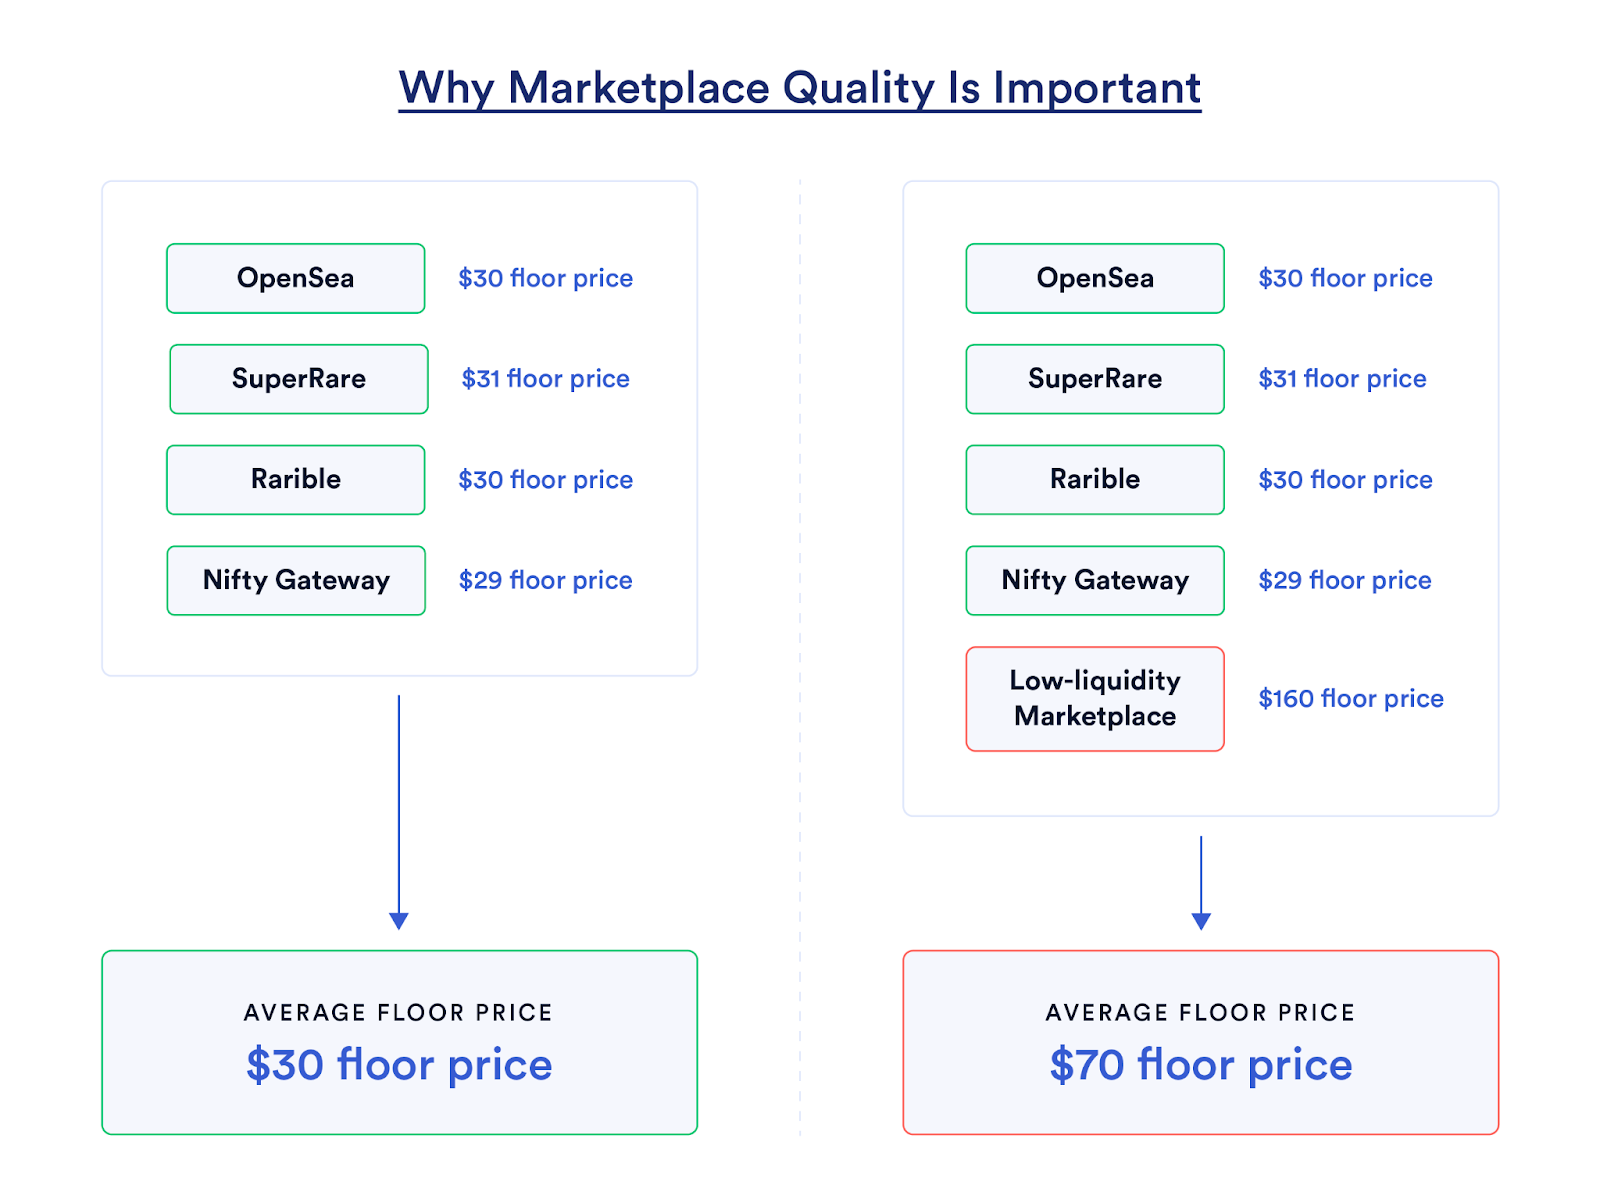 A diagram explaining why high-quality marketplaces are important in the marketplace aggregation process. 